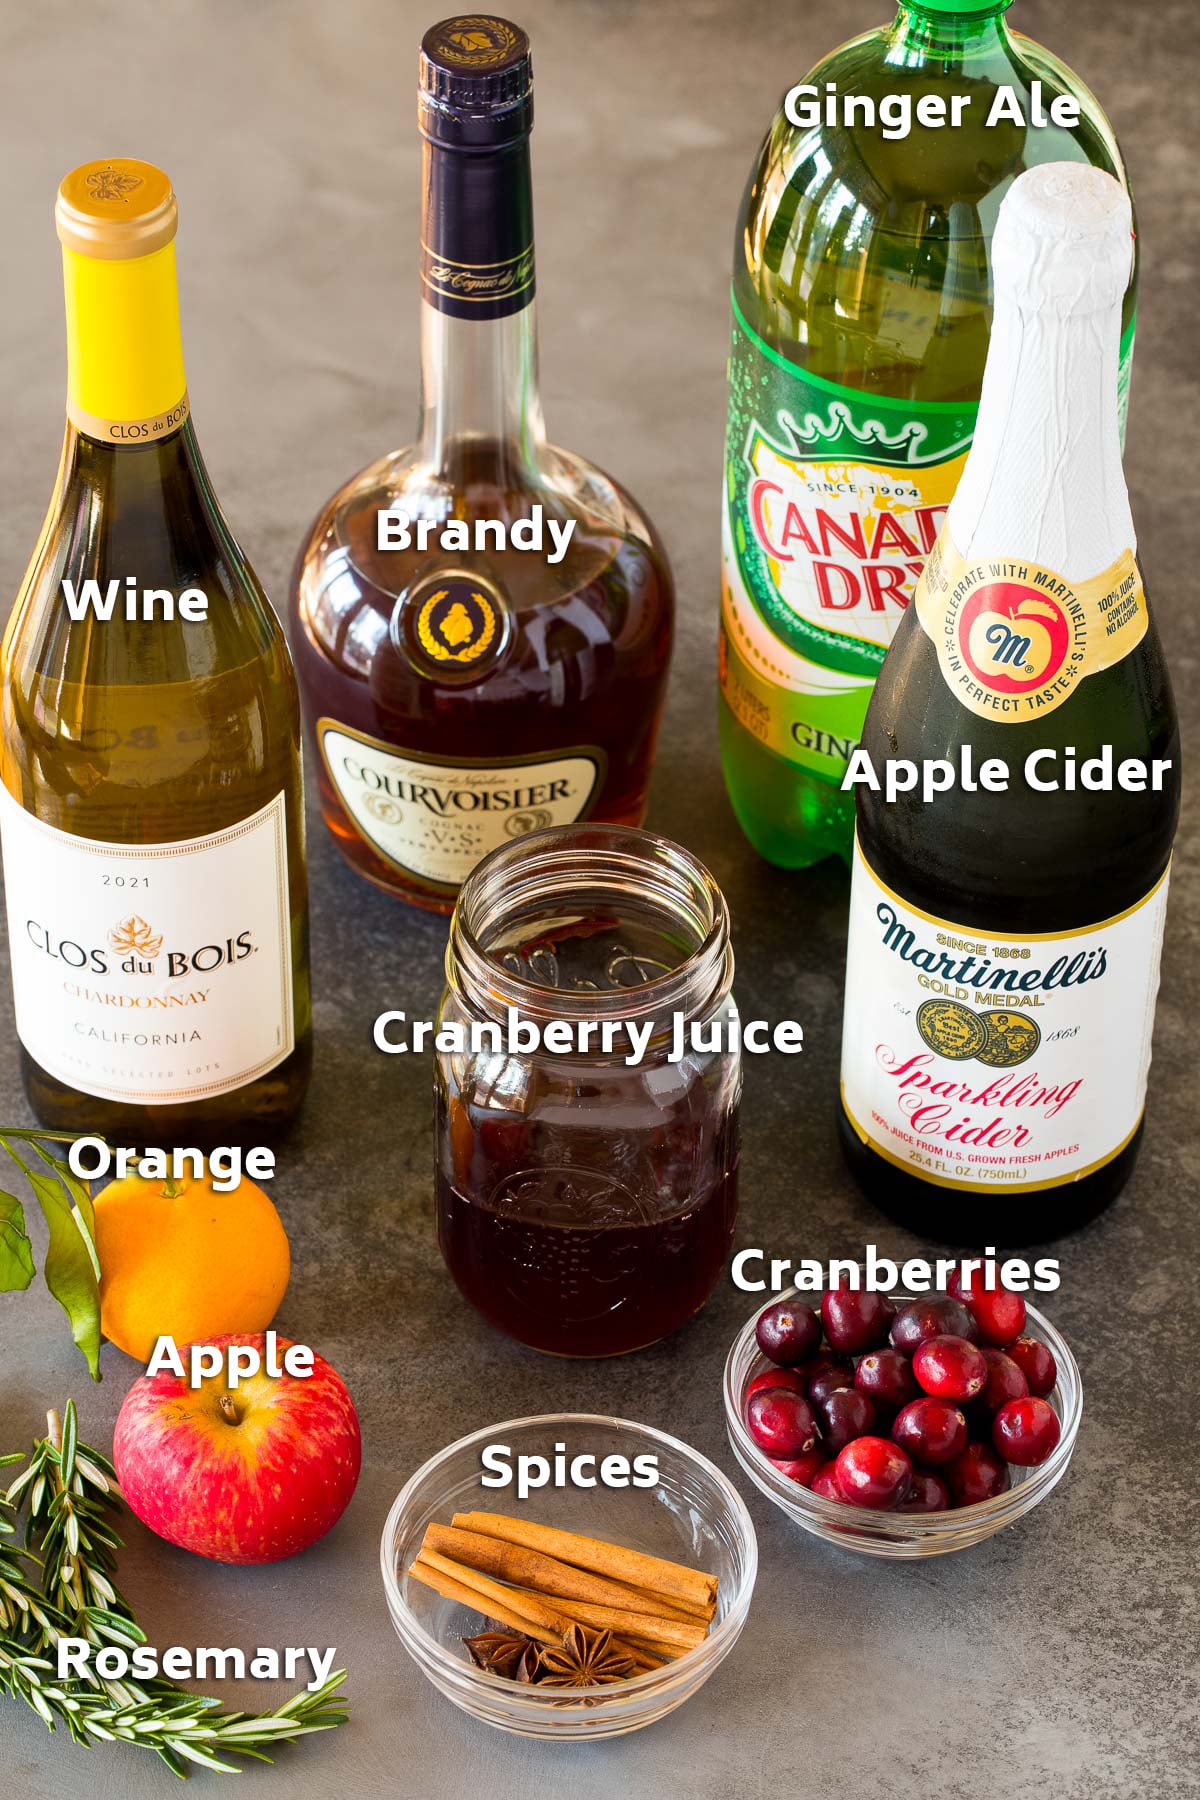 Ingredients including bottles of brandy, wine, apple cider, ginger ale and also fruit and spices.